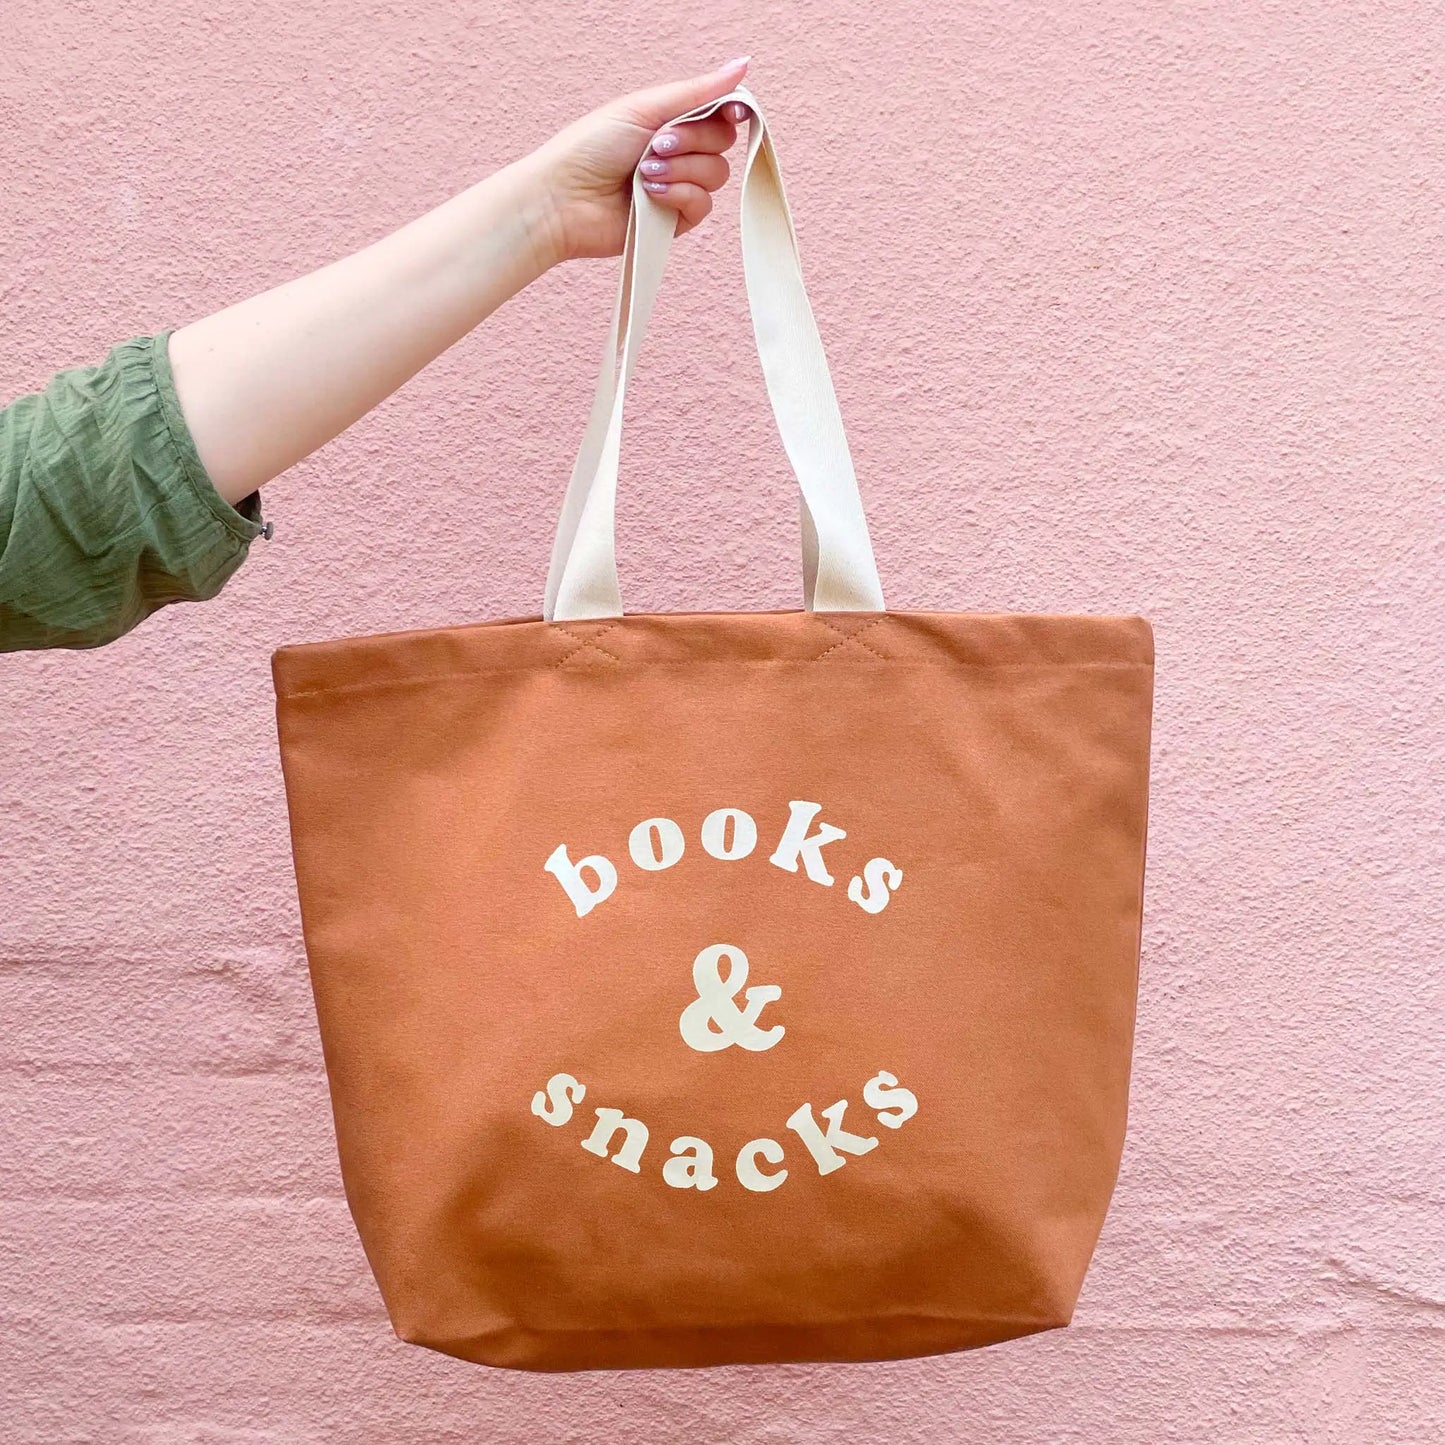 Books and Snacks Canvas Tote Bag - Tan